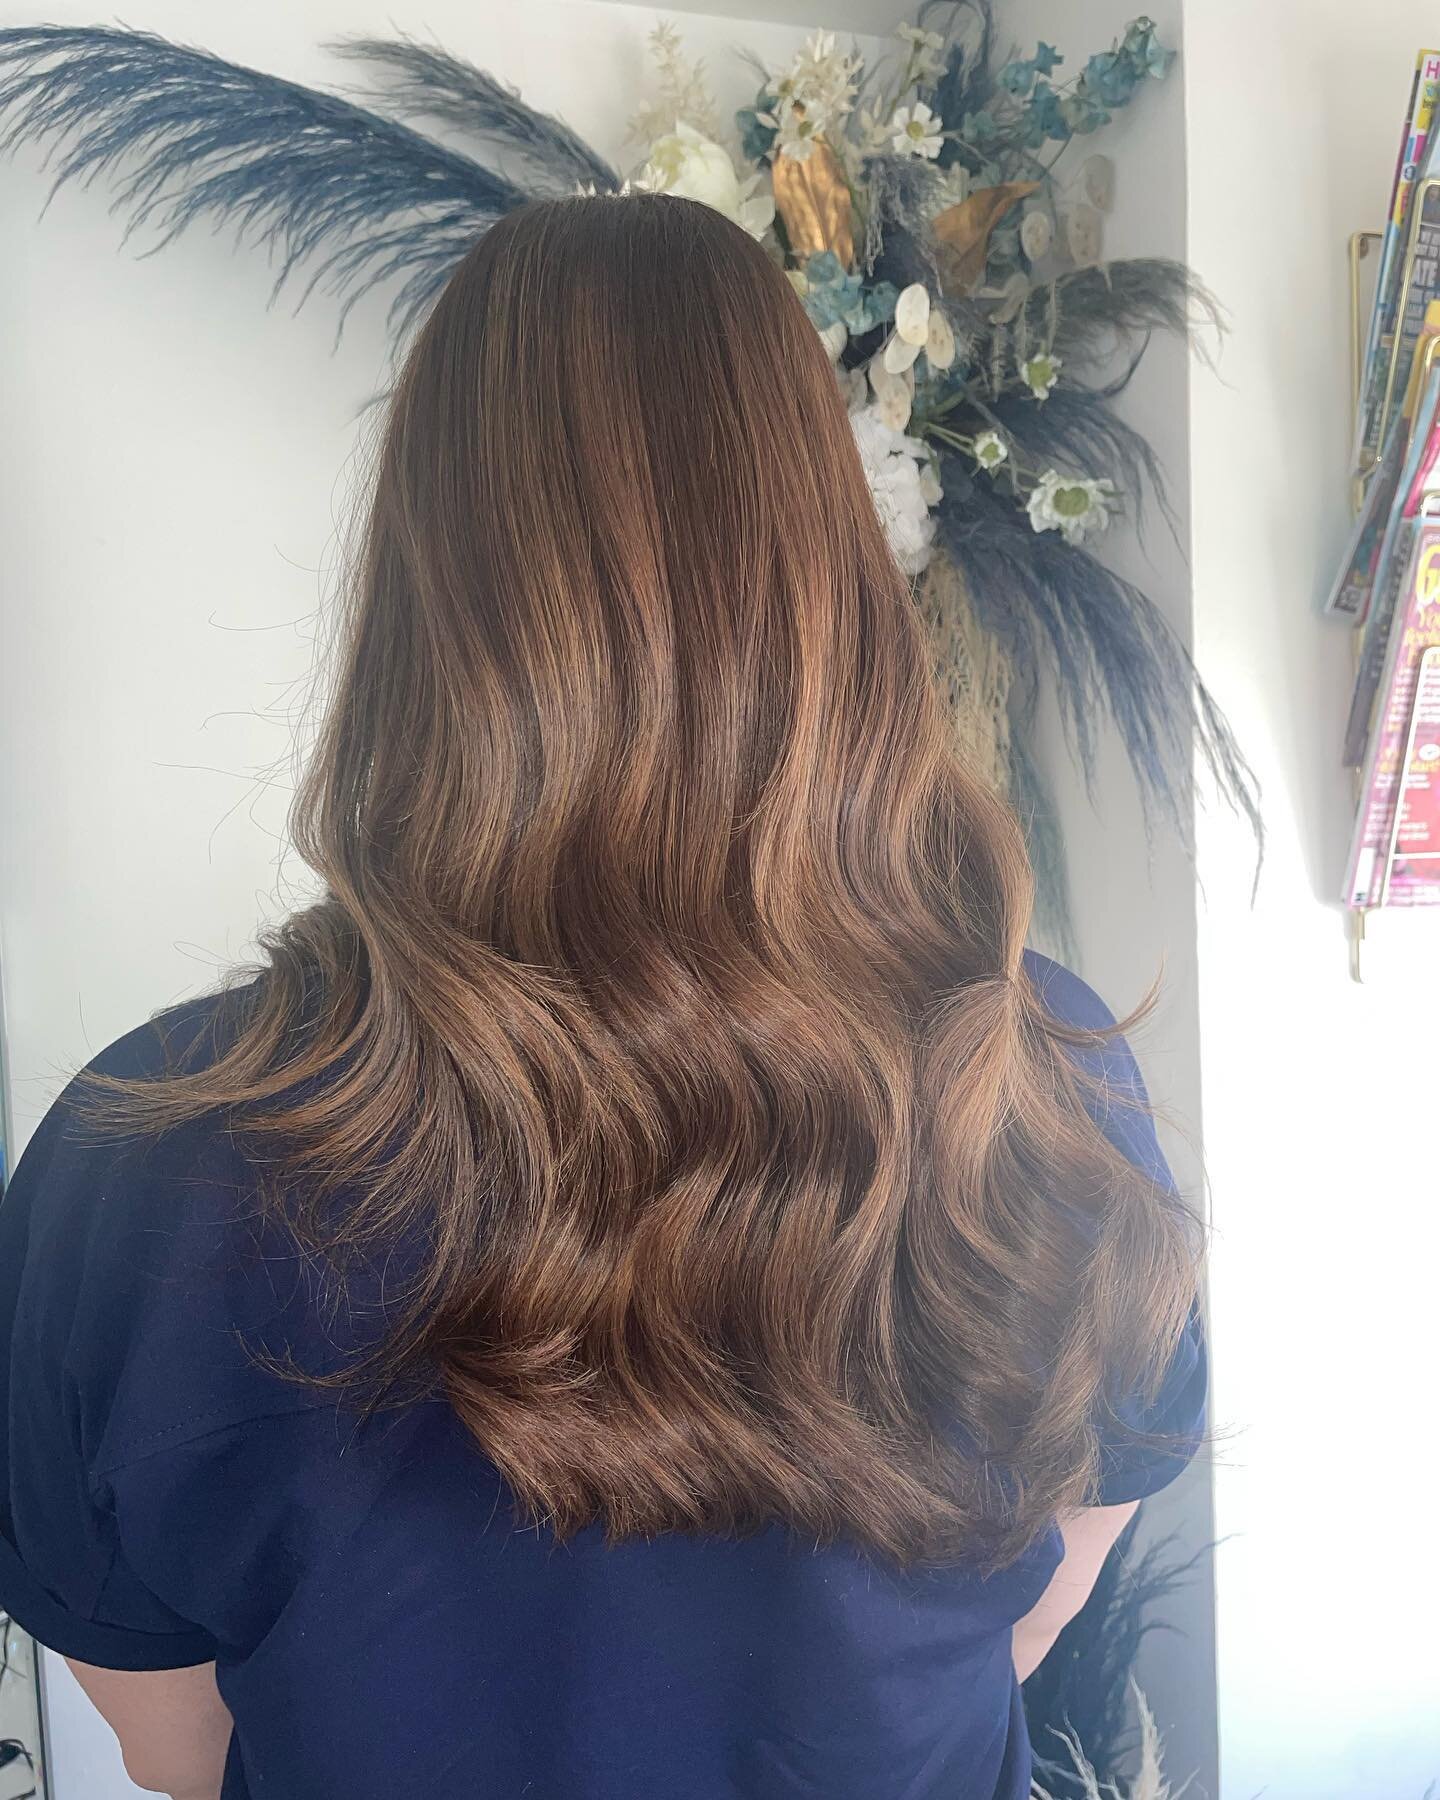 Reverse balayage🤎

Back to a warm brown with few lighter pieces left in to keep it multi-tonal! 

#kevinmurphy #miltonkeynes #glosshairsalon #miltonkeynes